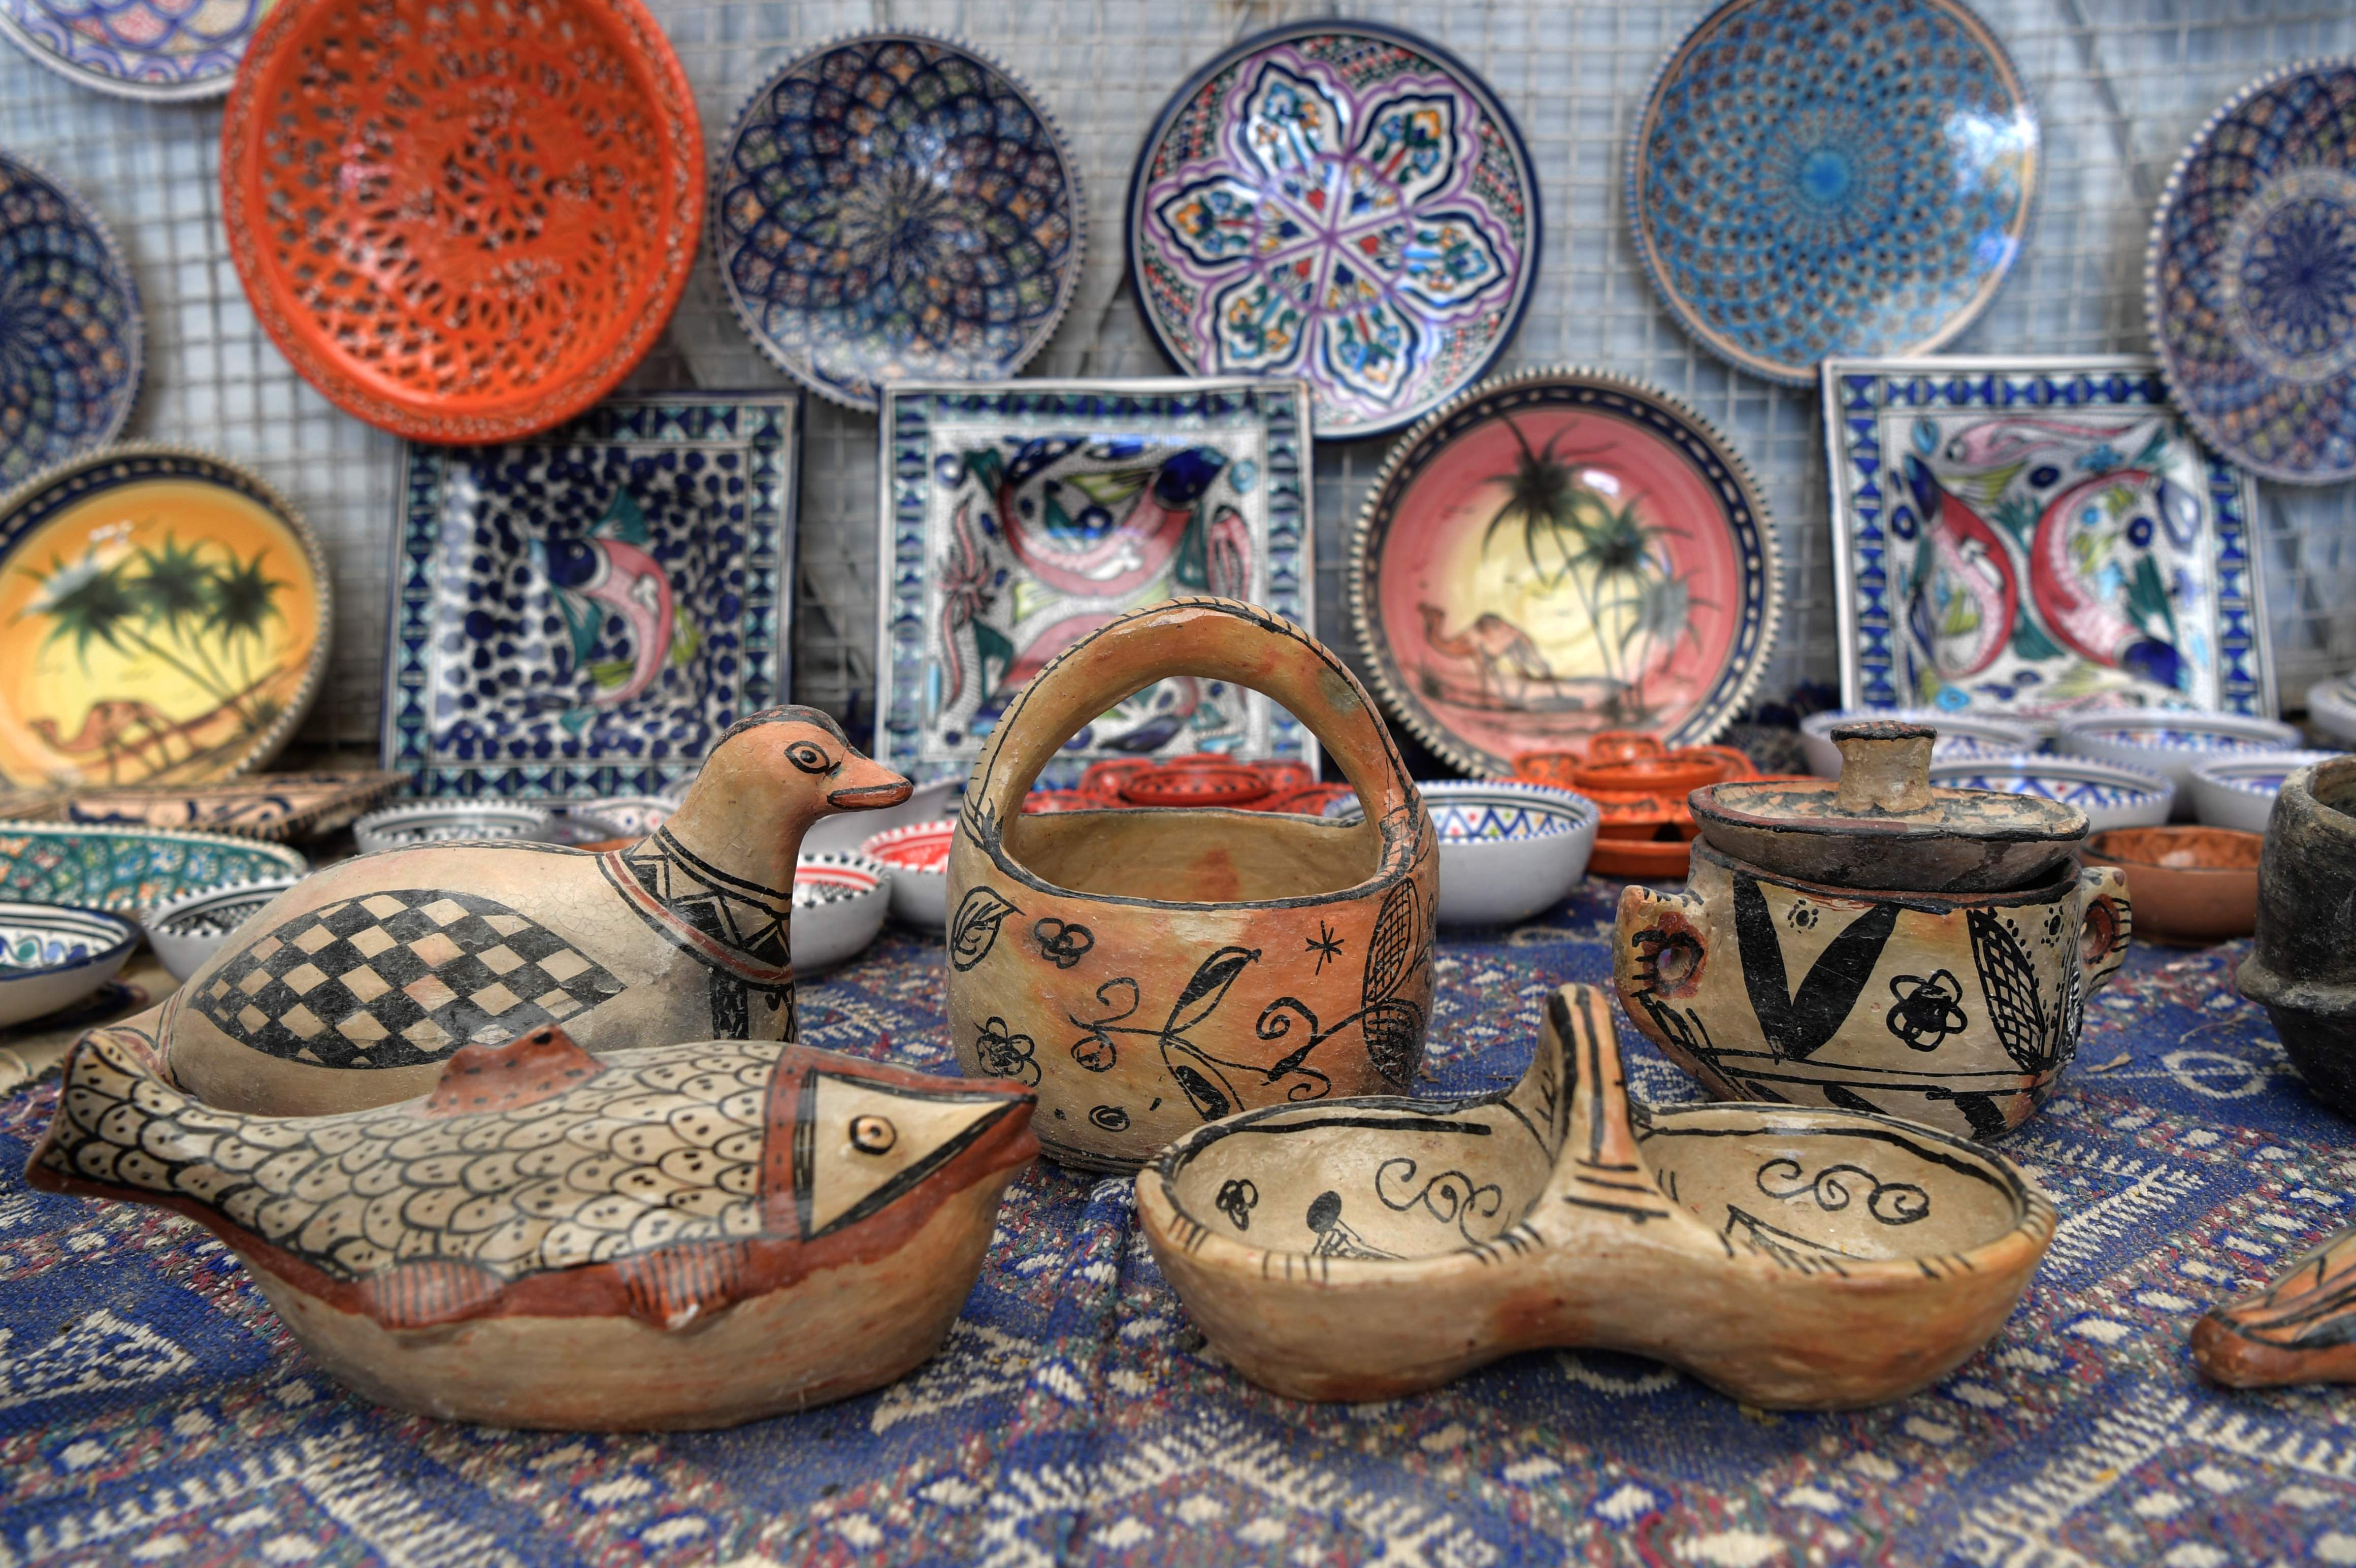 Pottery crafted in Sejnane is displayed at a souvenir shop in the Tunisian capital Tunis